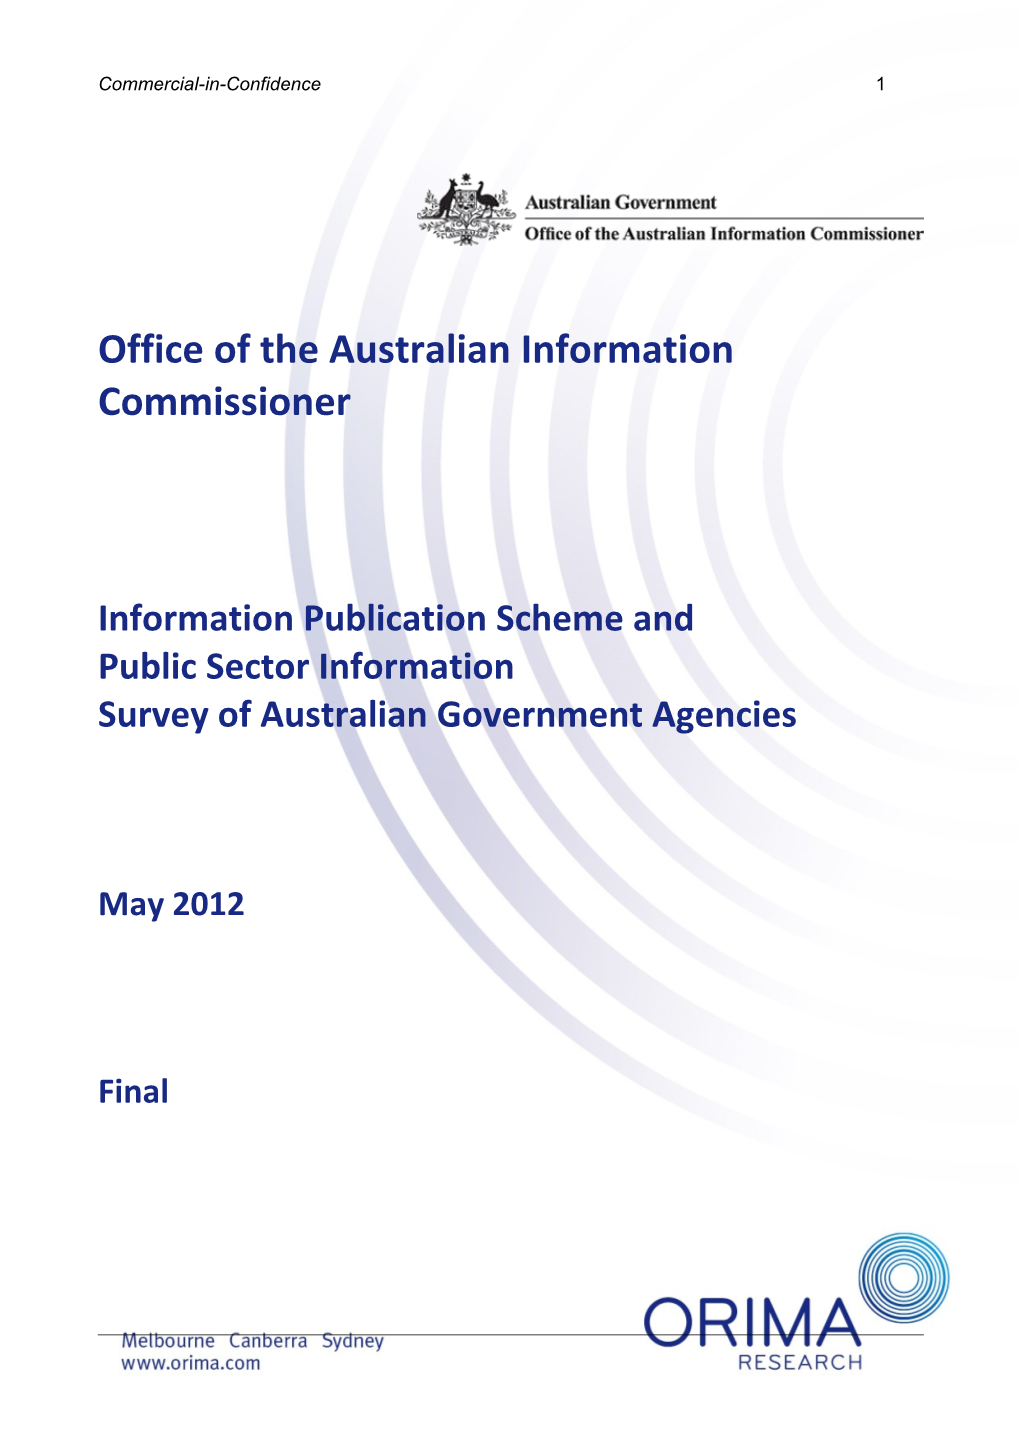 Information Publications Scheme and Public Sector Information: Survey of Australian Government